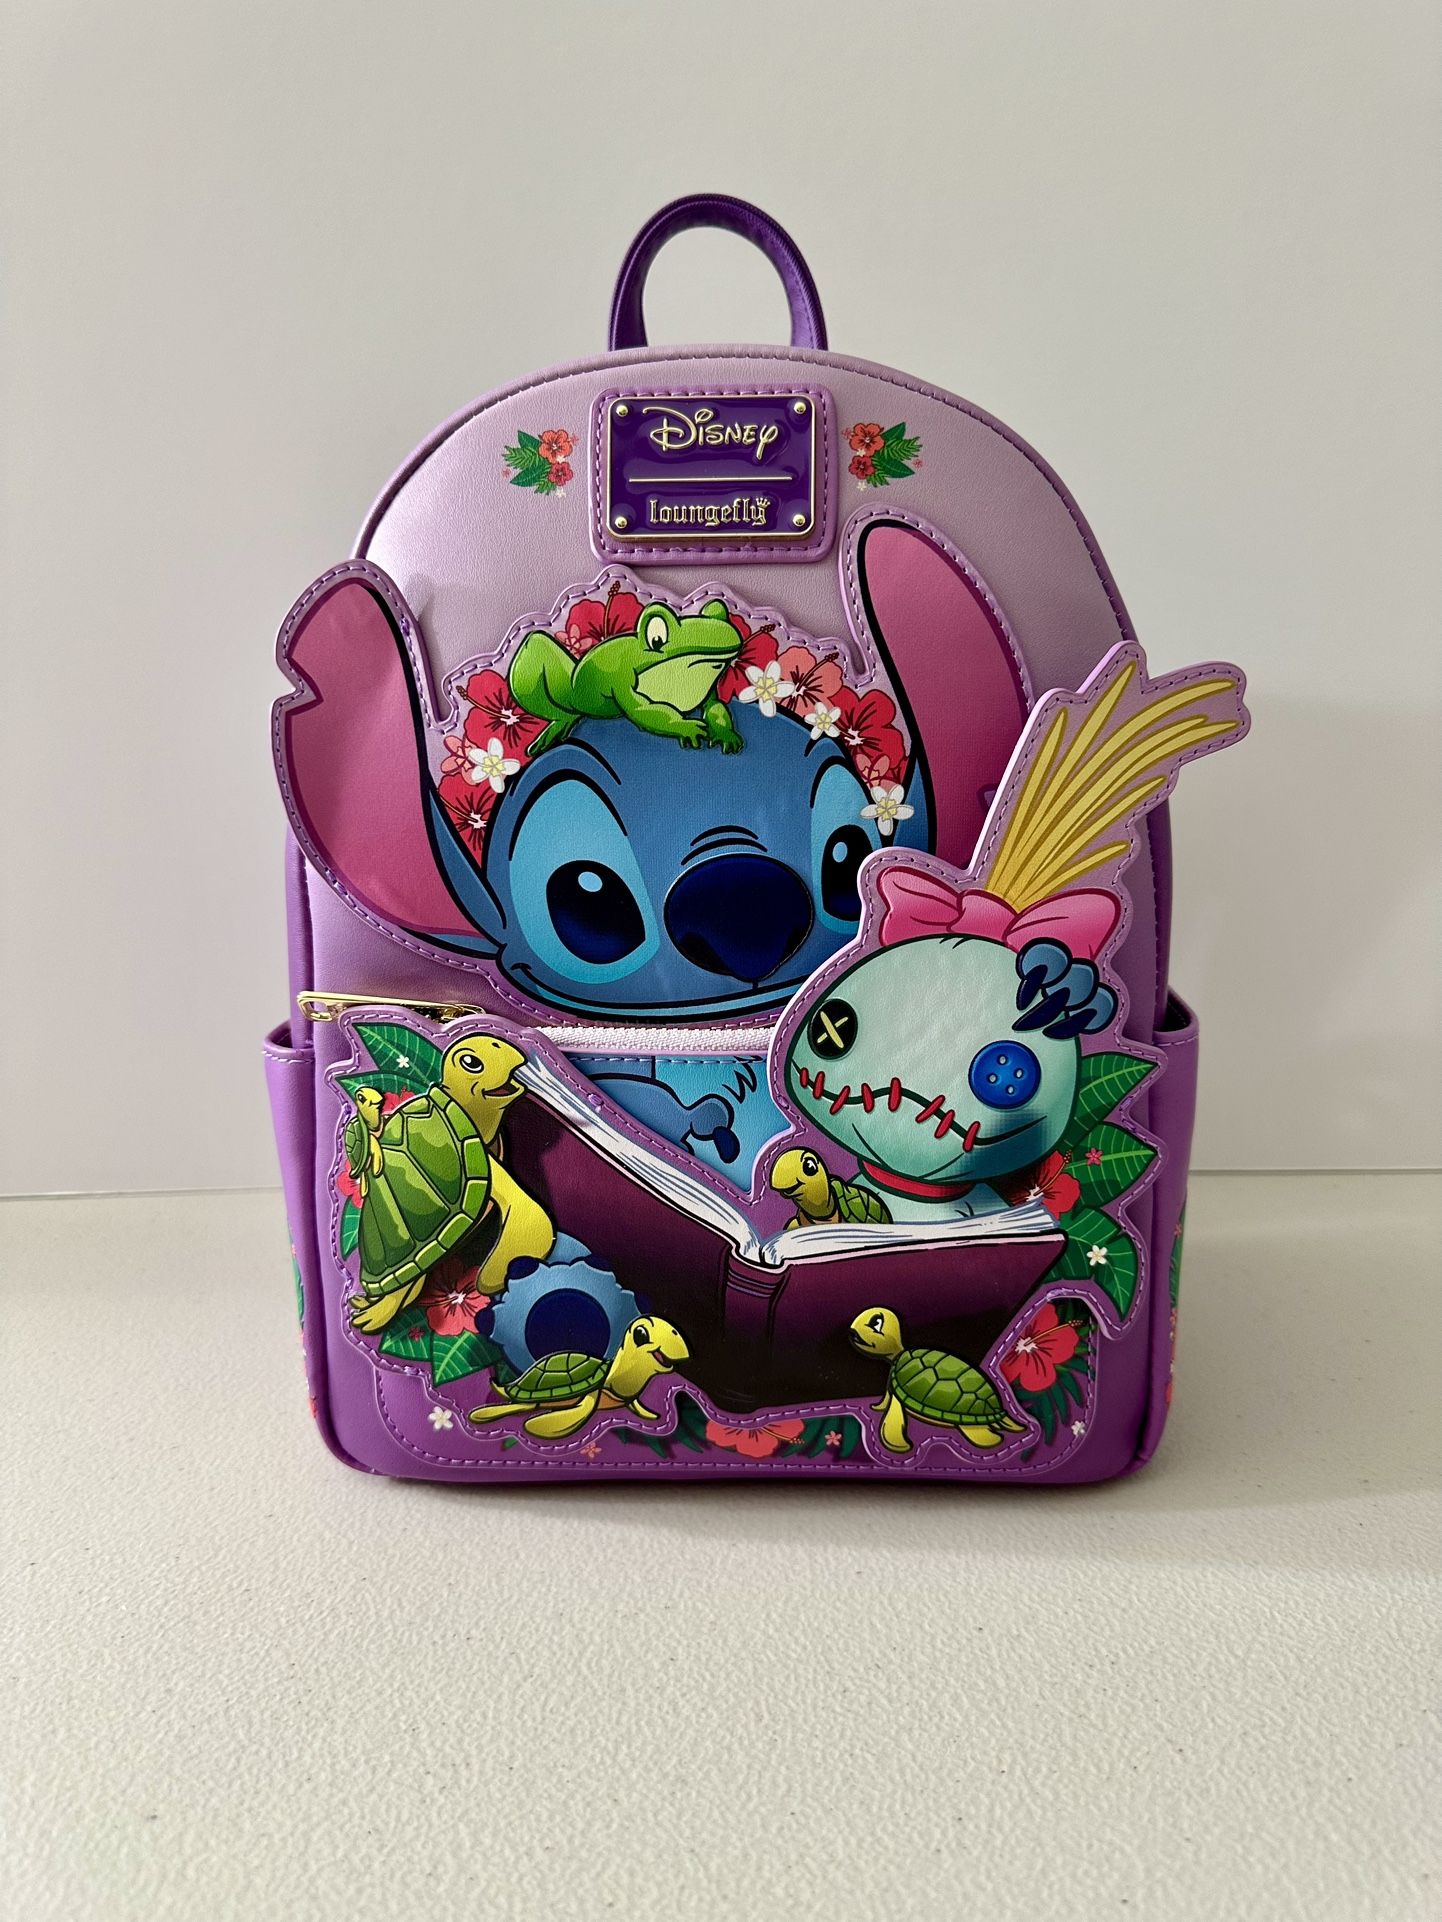 BRAND NEW WITH TAGS. DISNEY LILO & STITCH READING BOOK MINI LOUNGEFLY BACKPACK FOR SALE. EXCLUSIVE. 